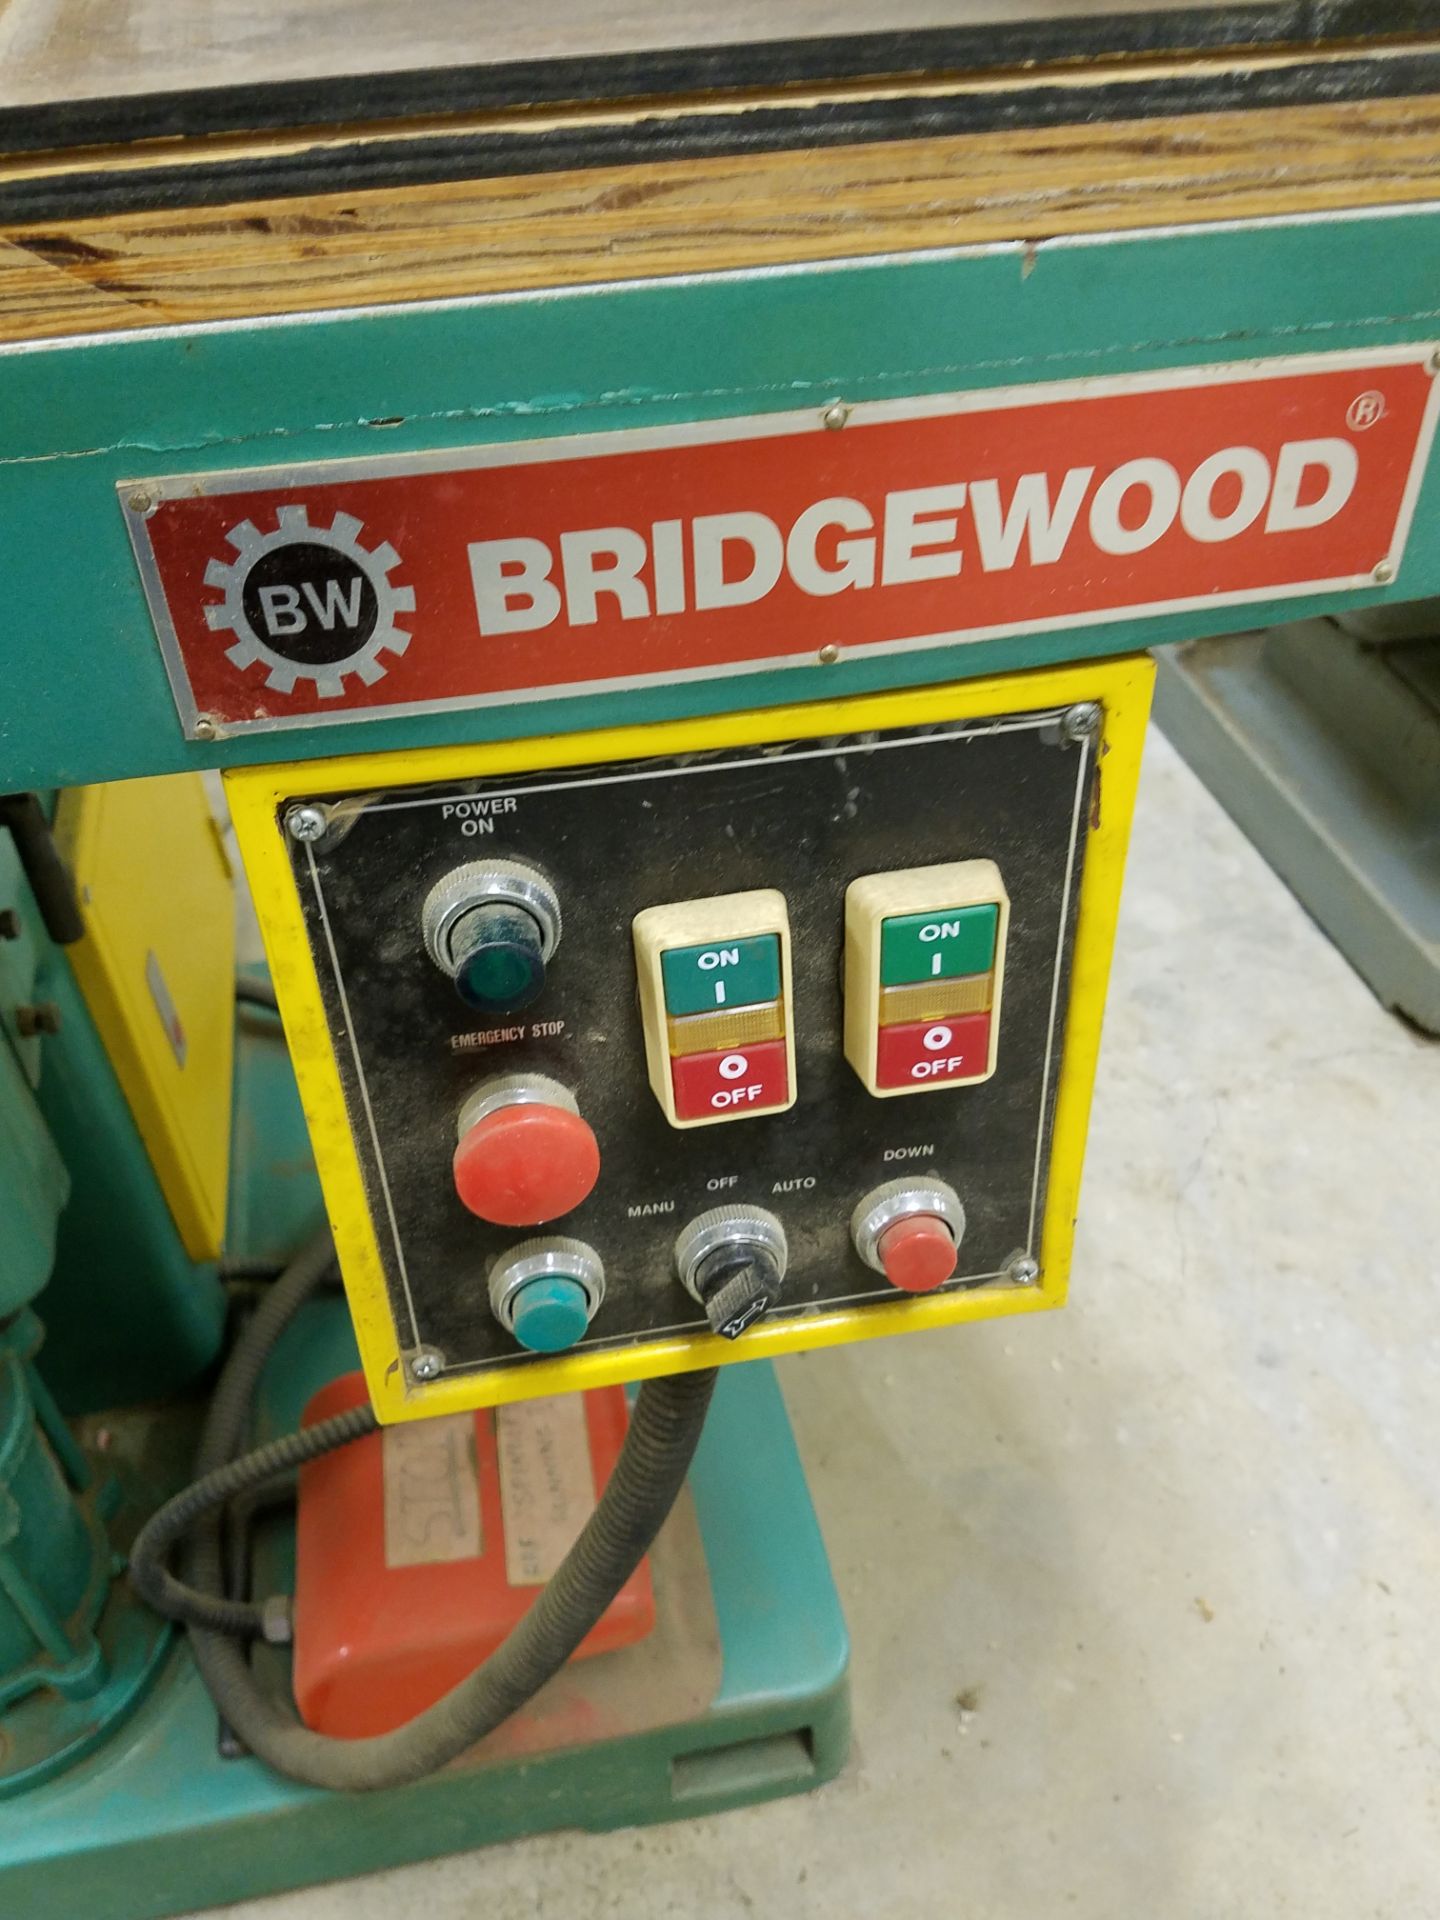 Bridgewood Model BW808DMA Multi Spindle Drilling and Boring Machine, 16 Spindle with Adjustable - Image 2 of 6